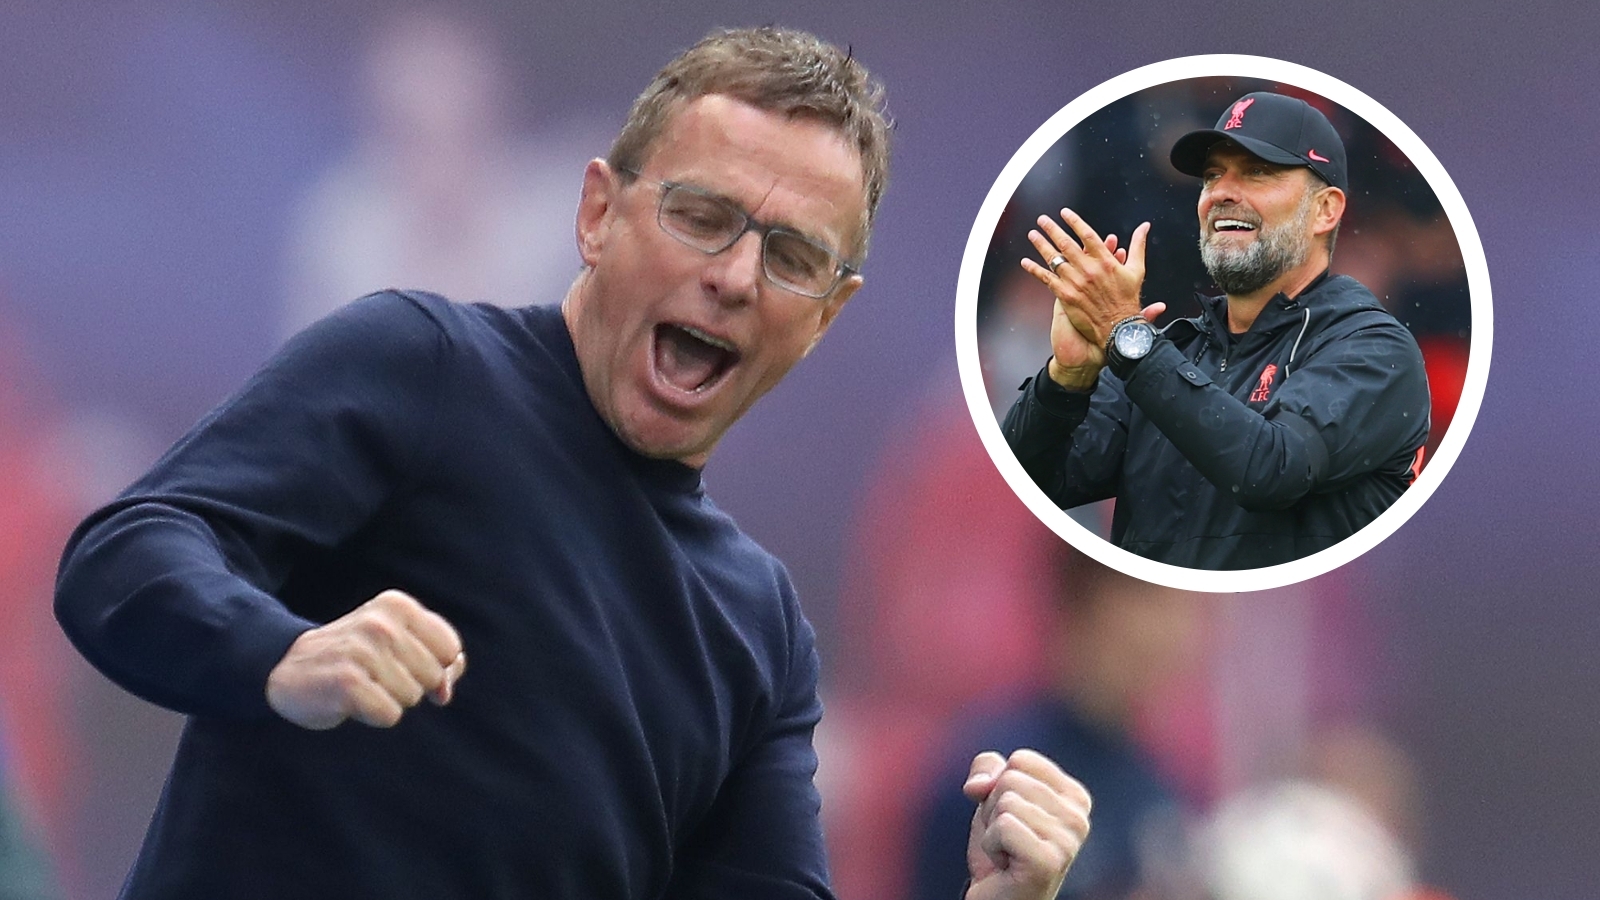 Unfortunately a good coach is coming to Man Utd' – Liverpool boss Klopp  reveals what Rangnick will bring to Red Devils  India